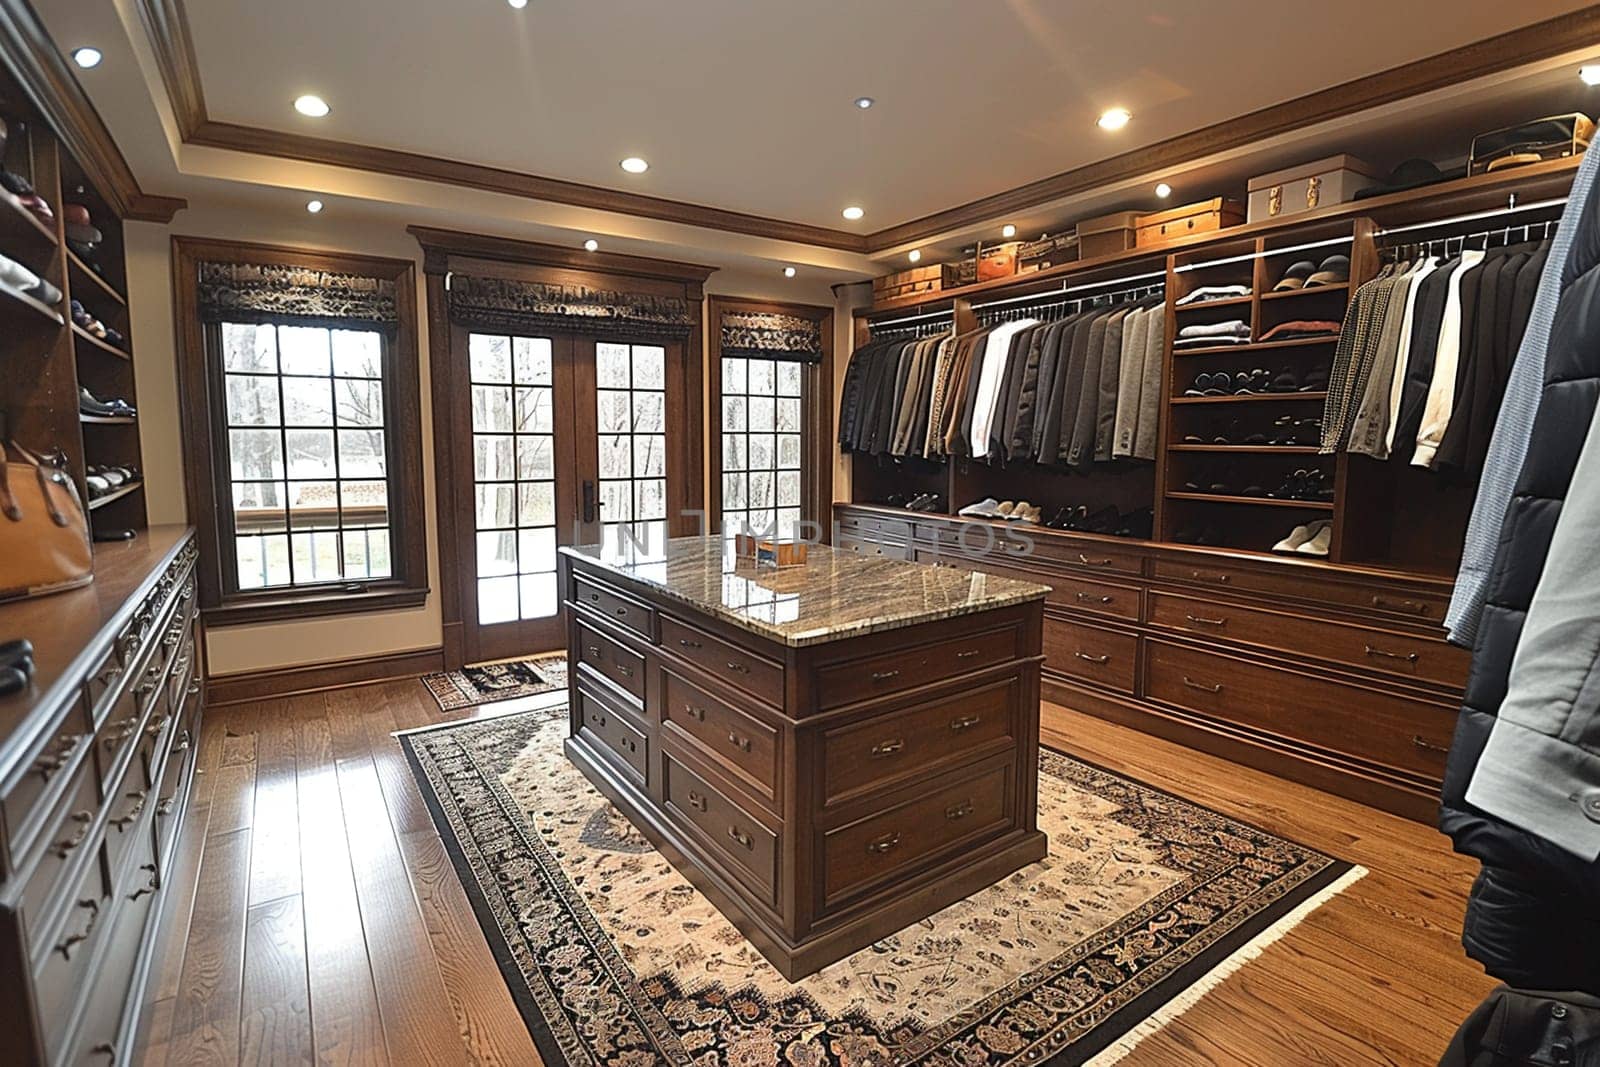 Spacious walk-in closet with custom shelving and an island dresser